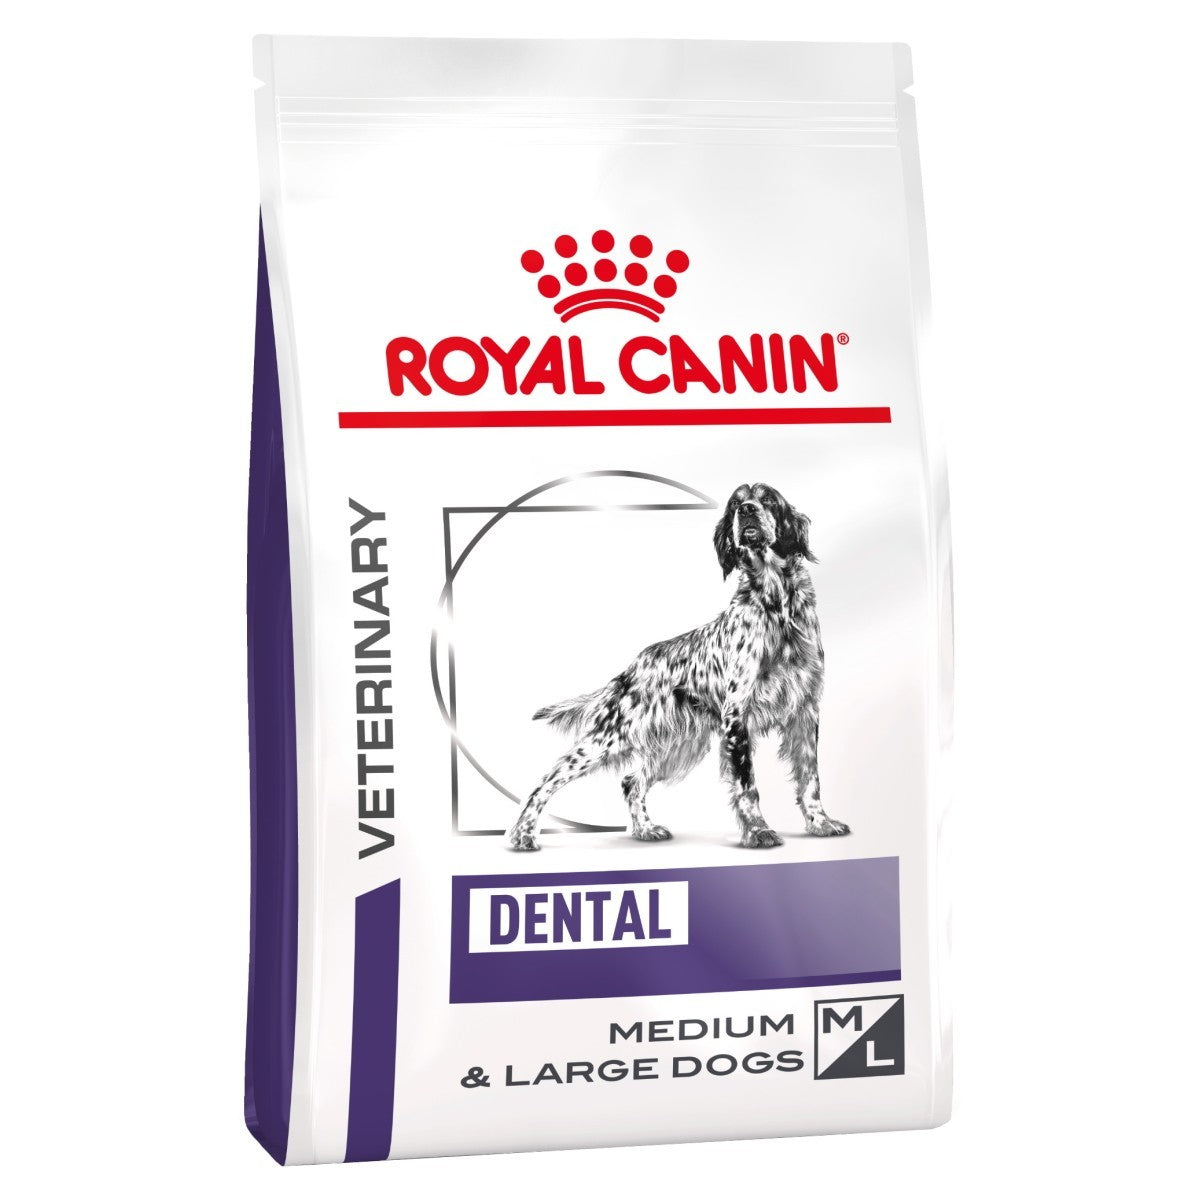 Royal Canin Dental Dry Food for Medium/Large Dogs